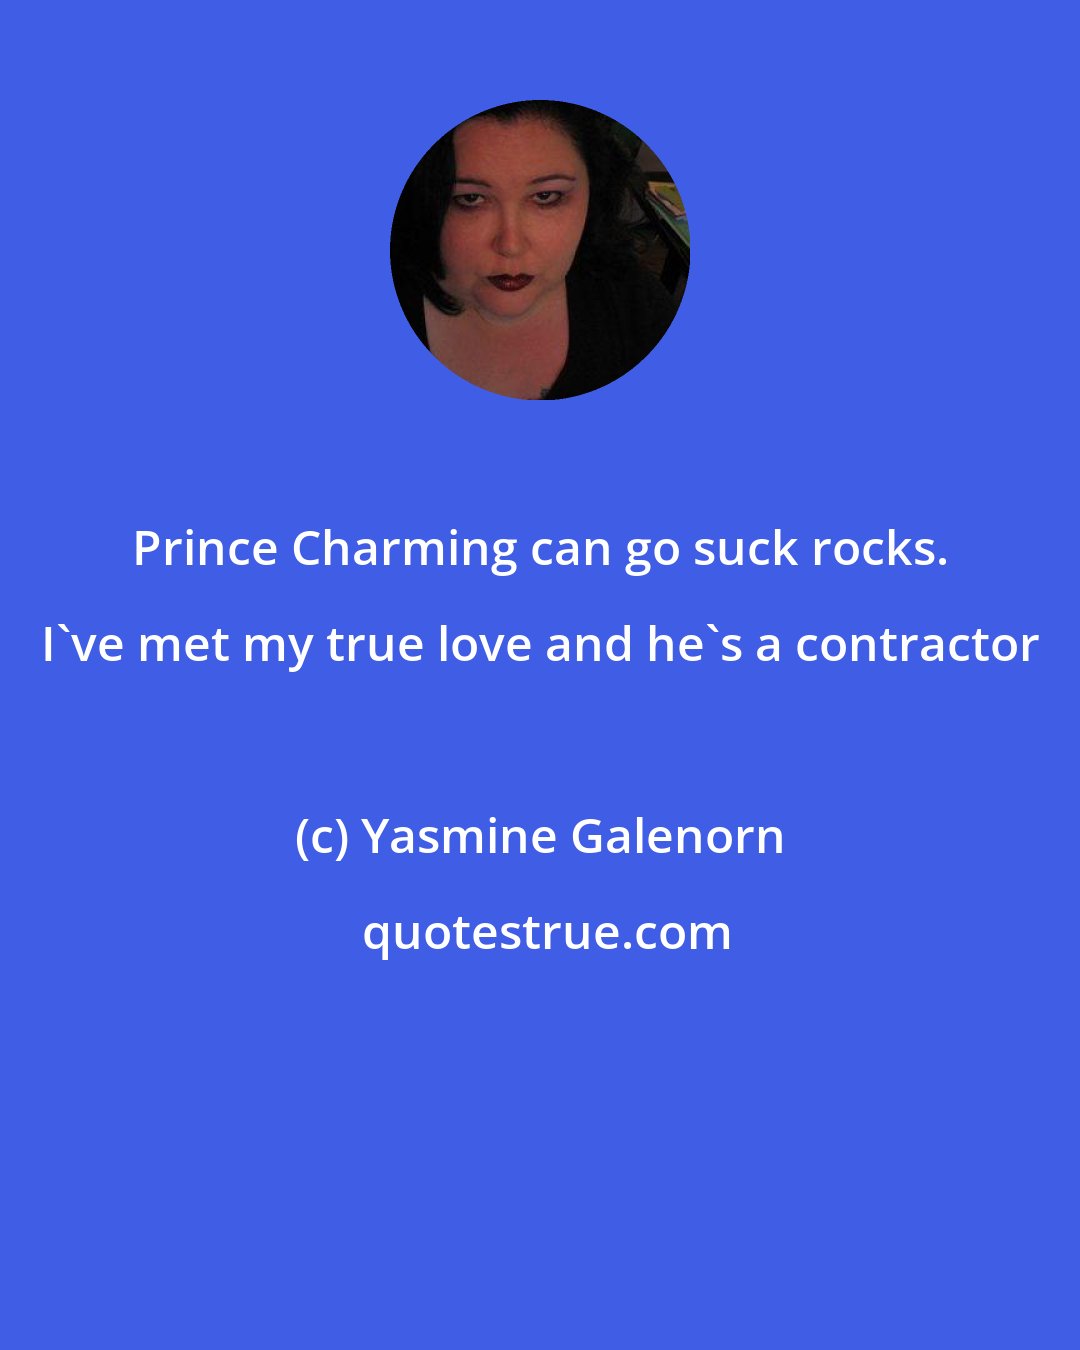 Yasmine Galenorn: Prince Charming can go suck rocks. I've met my true love and he's a contractor